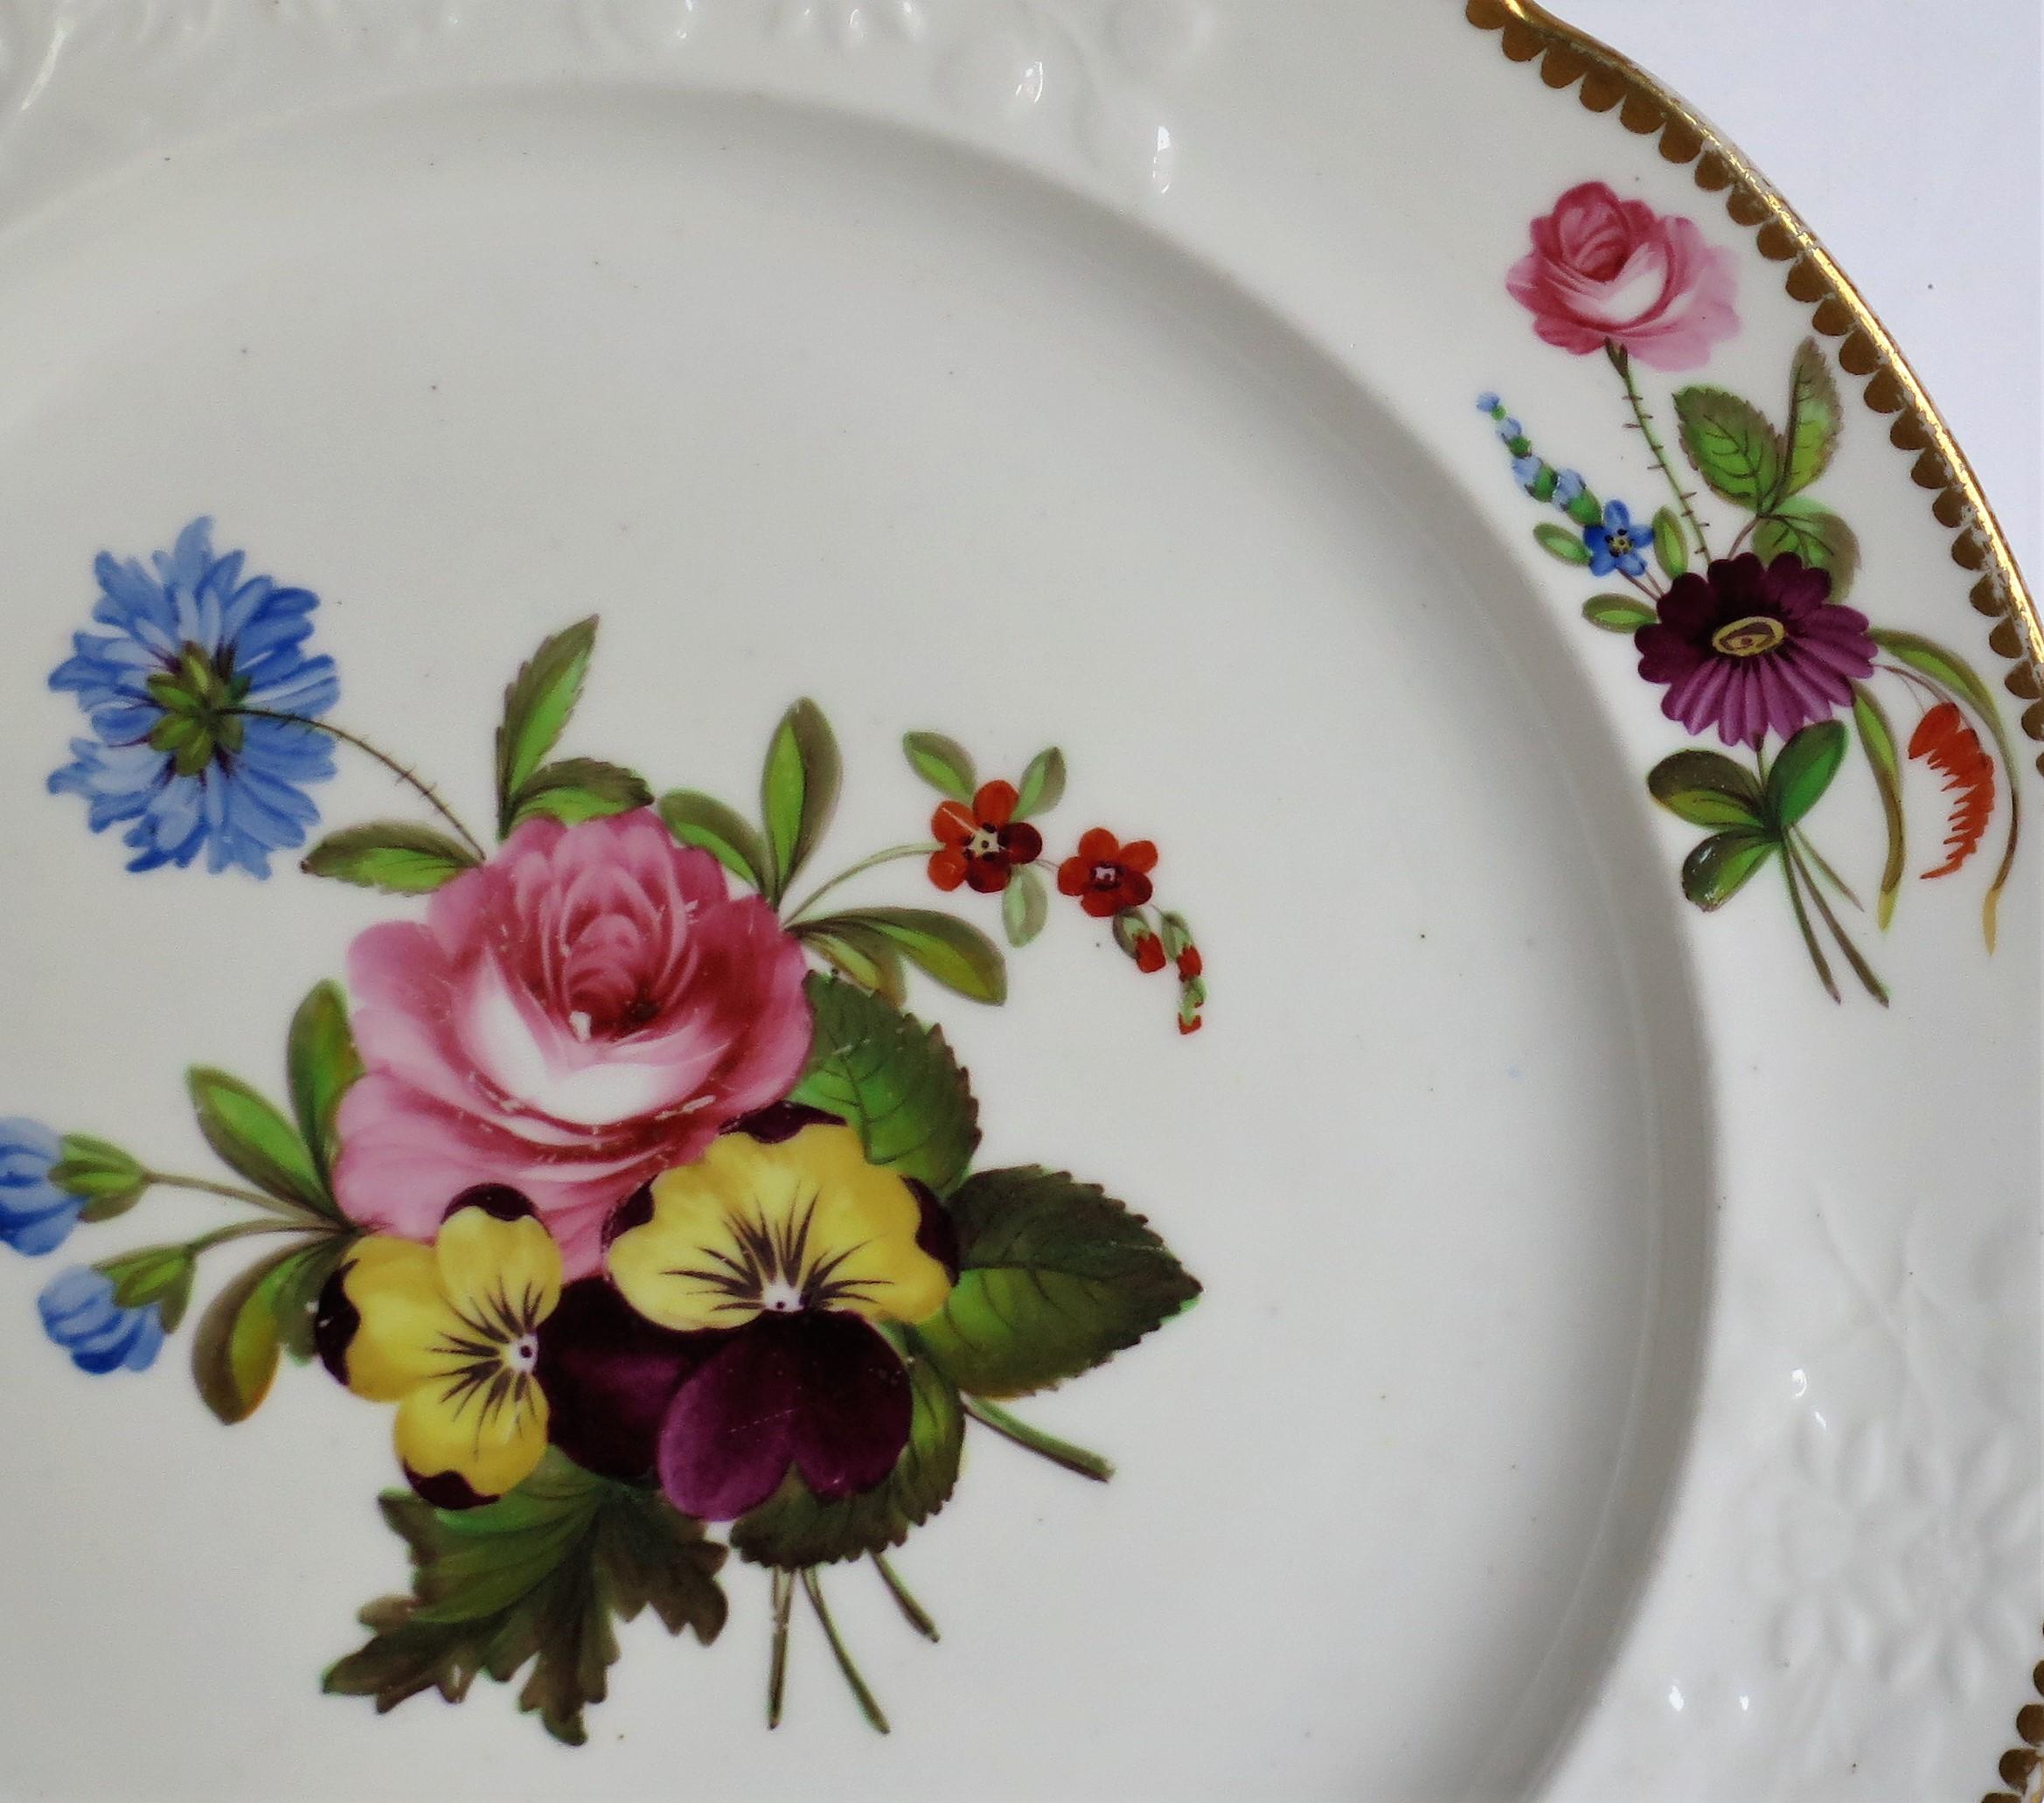 19th Century Georgian Porcelain Plate by Spode Hand Painted Botanical Ptn 3127, circa 1820 For Sale